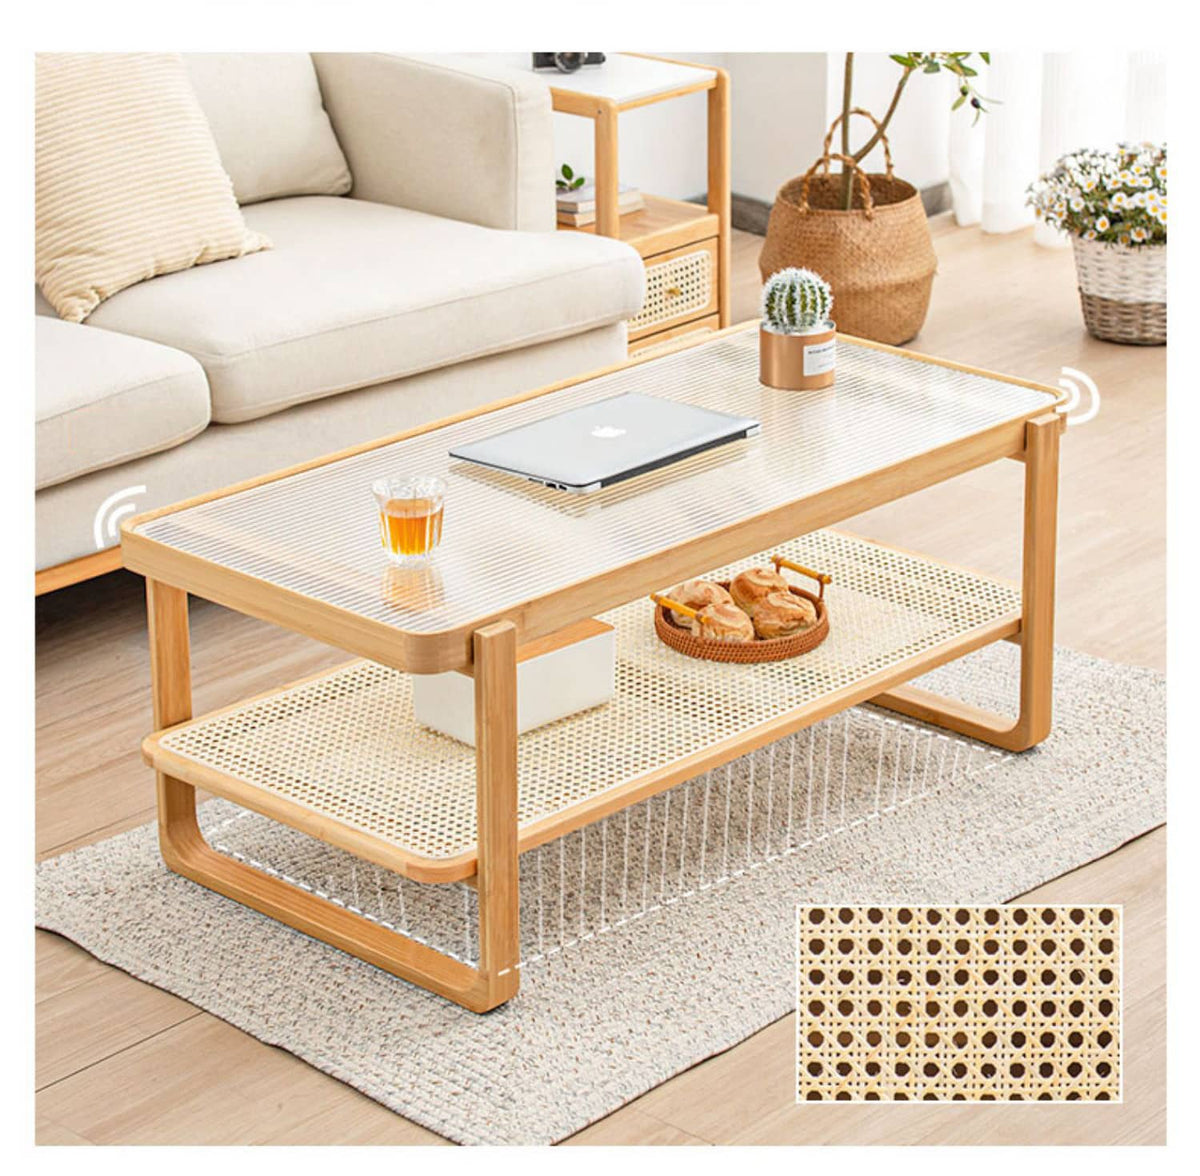 Stunning Bamboo Rattan Weave Tea Table with Glass Top - Natural Wood Finish hsl-85